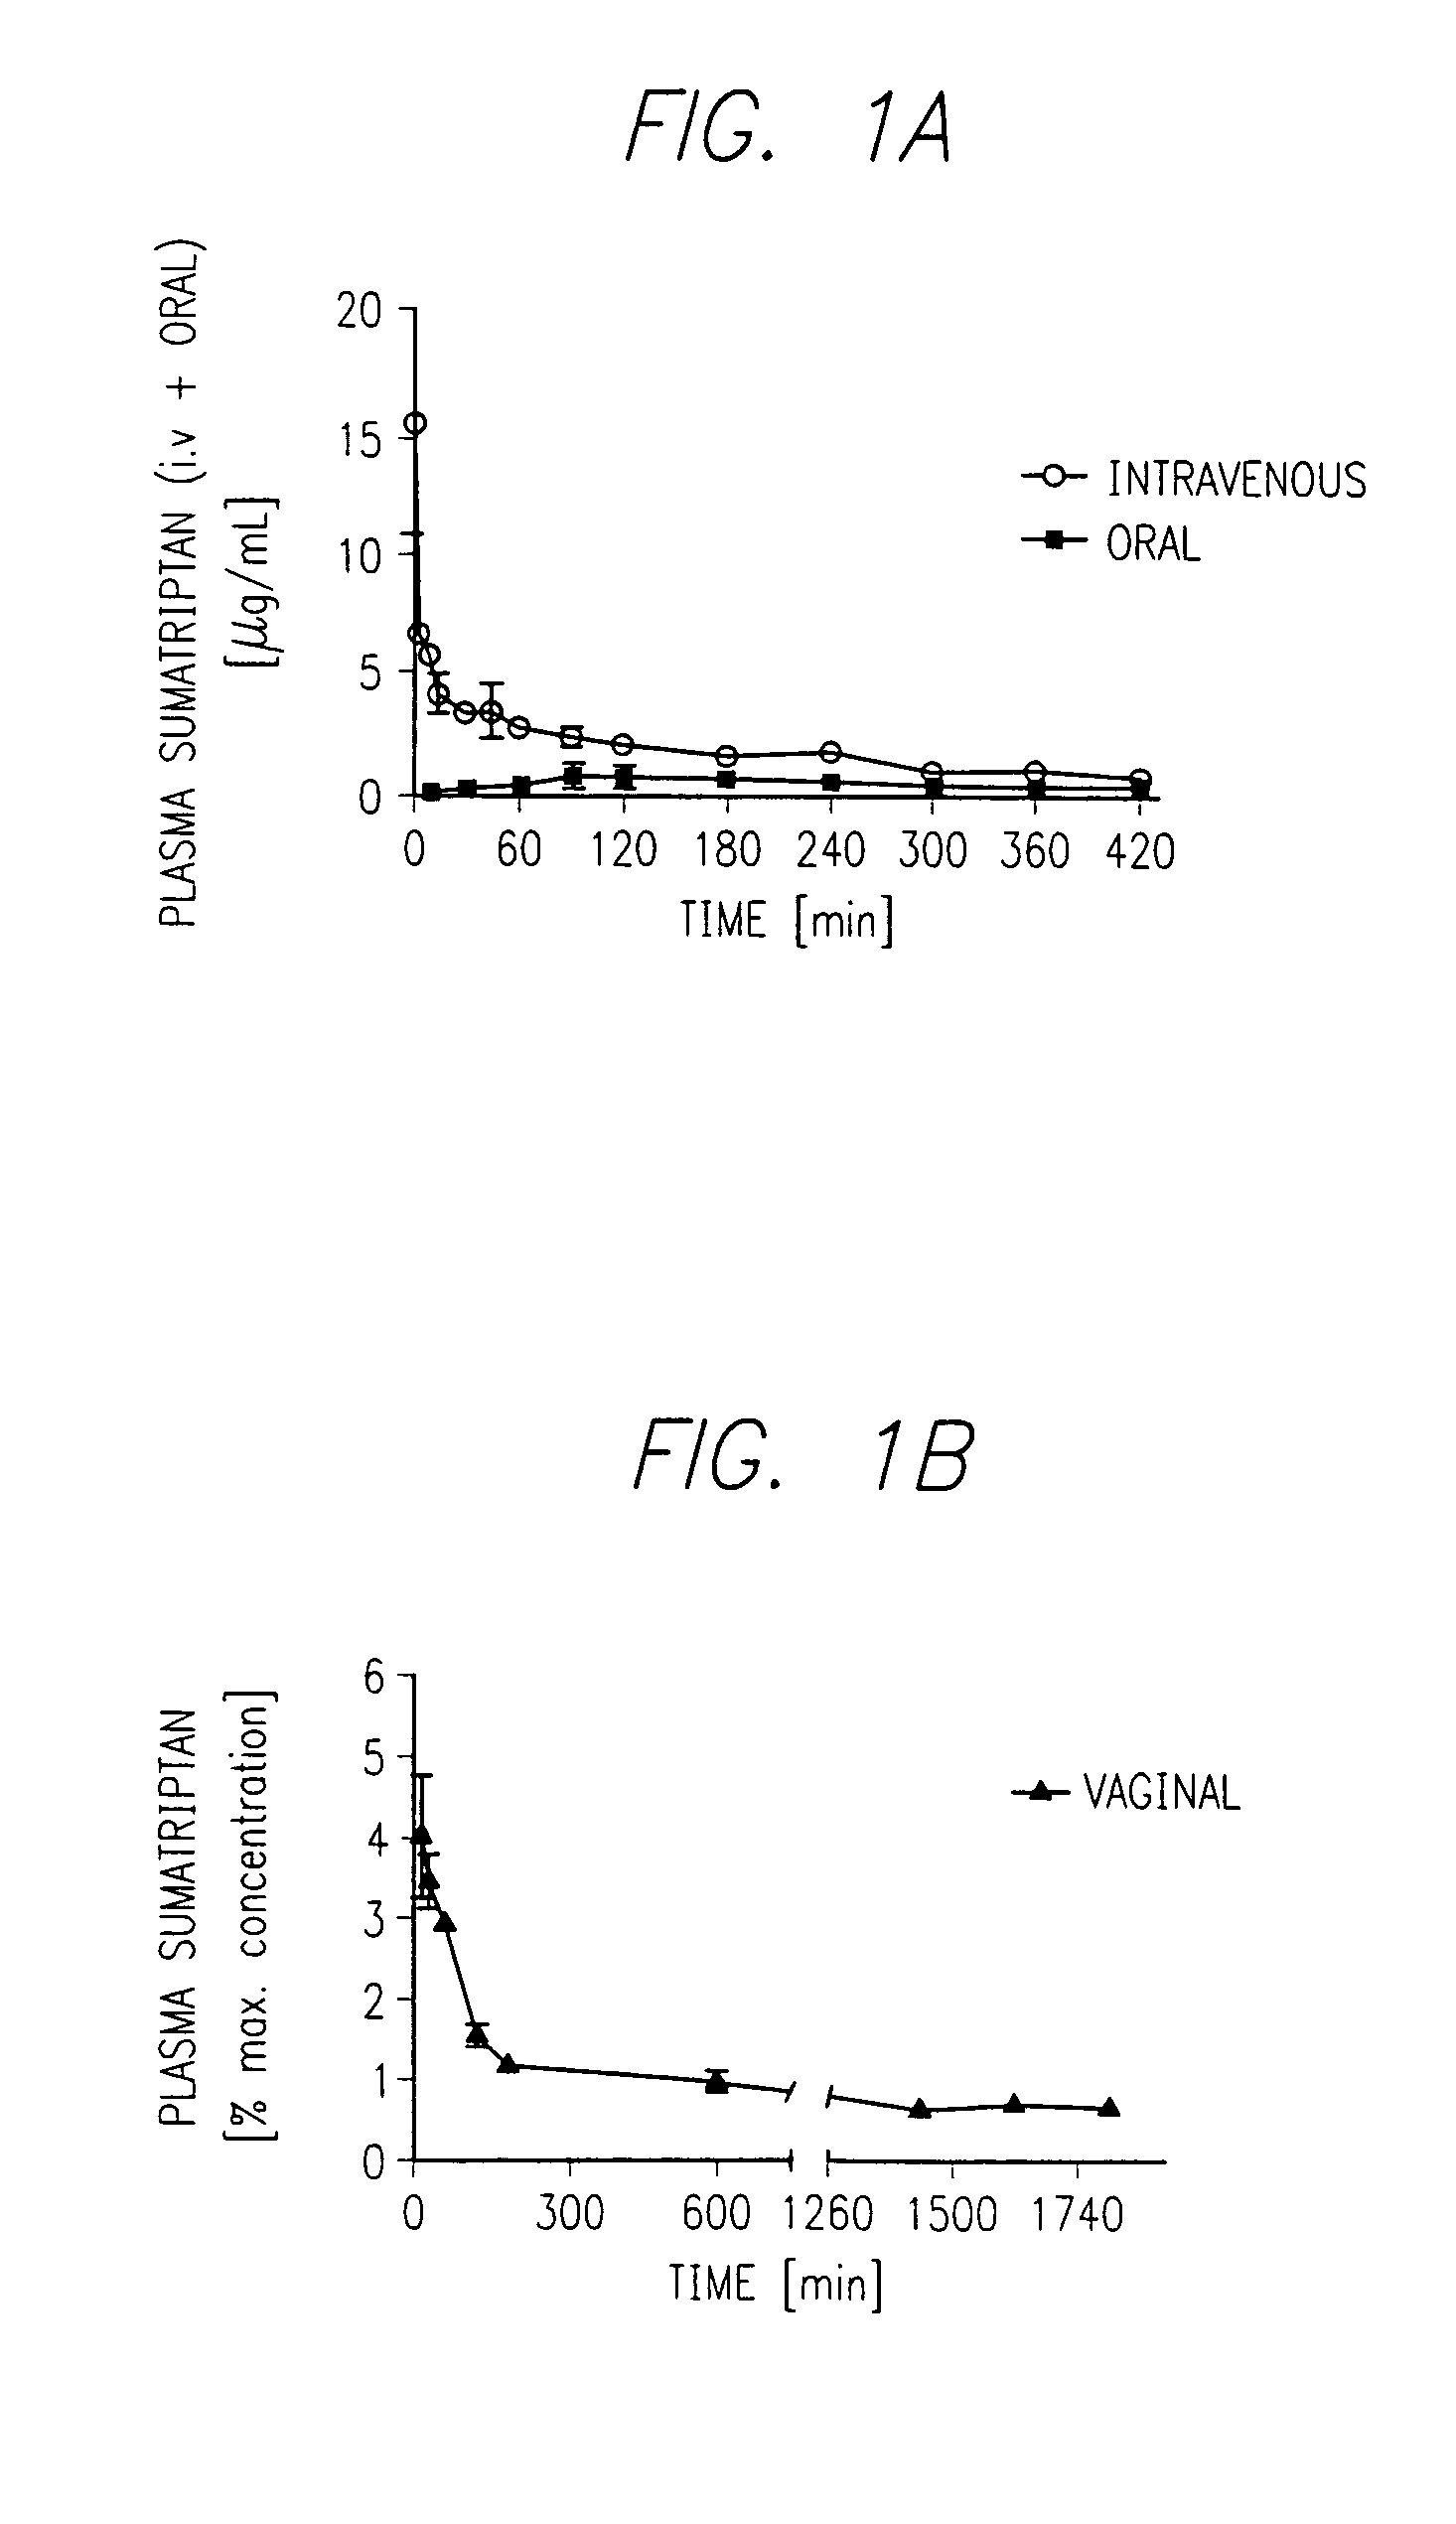 Coated vaginal device for delivery of anti-migraine and anti-nausea drugs